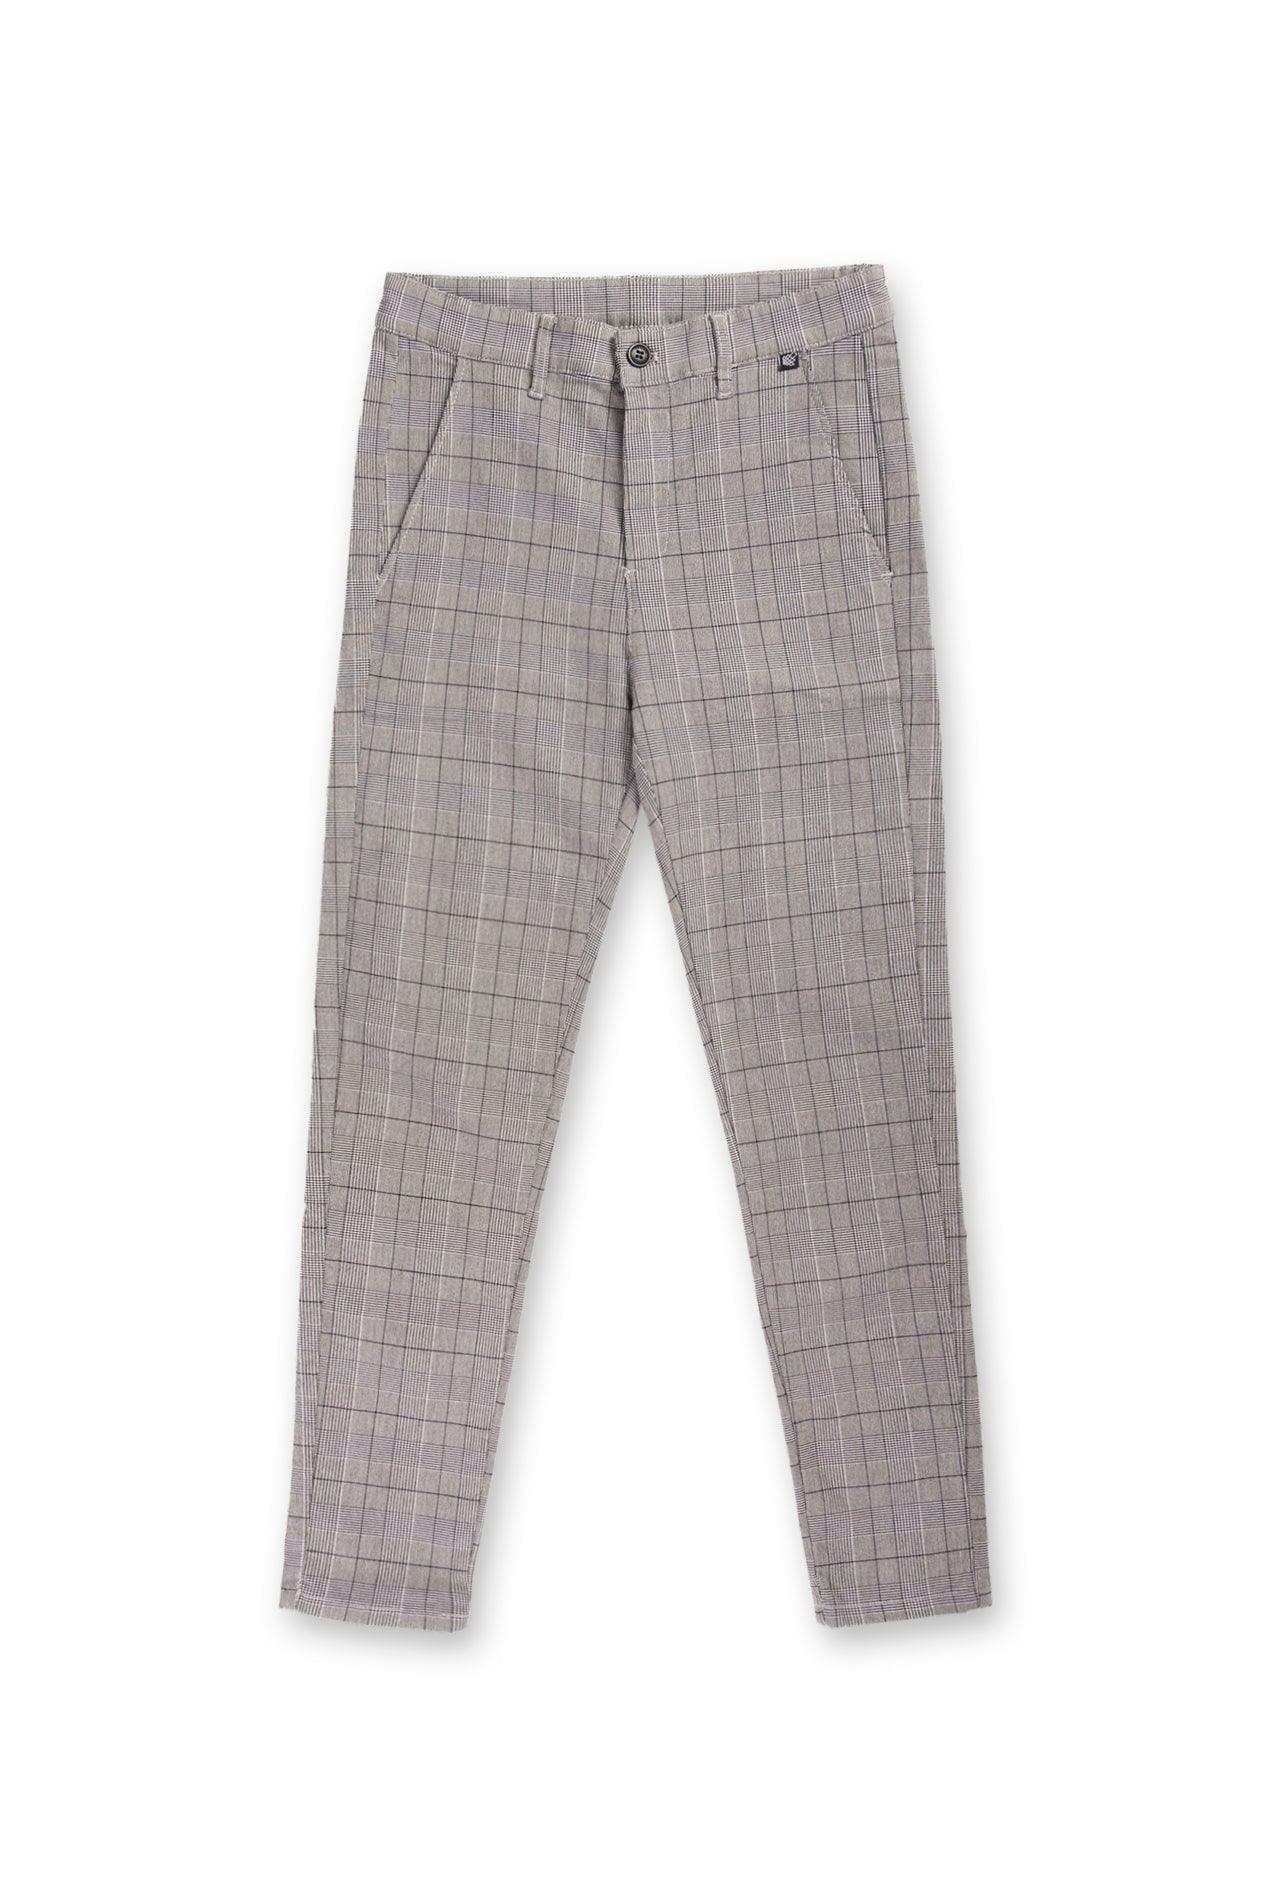 Men's Fitted Stretchy Pants - Checker - Jed North Canada